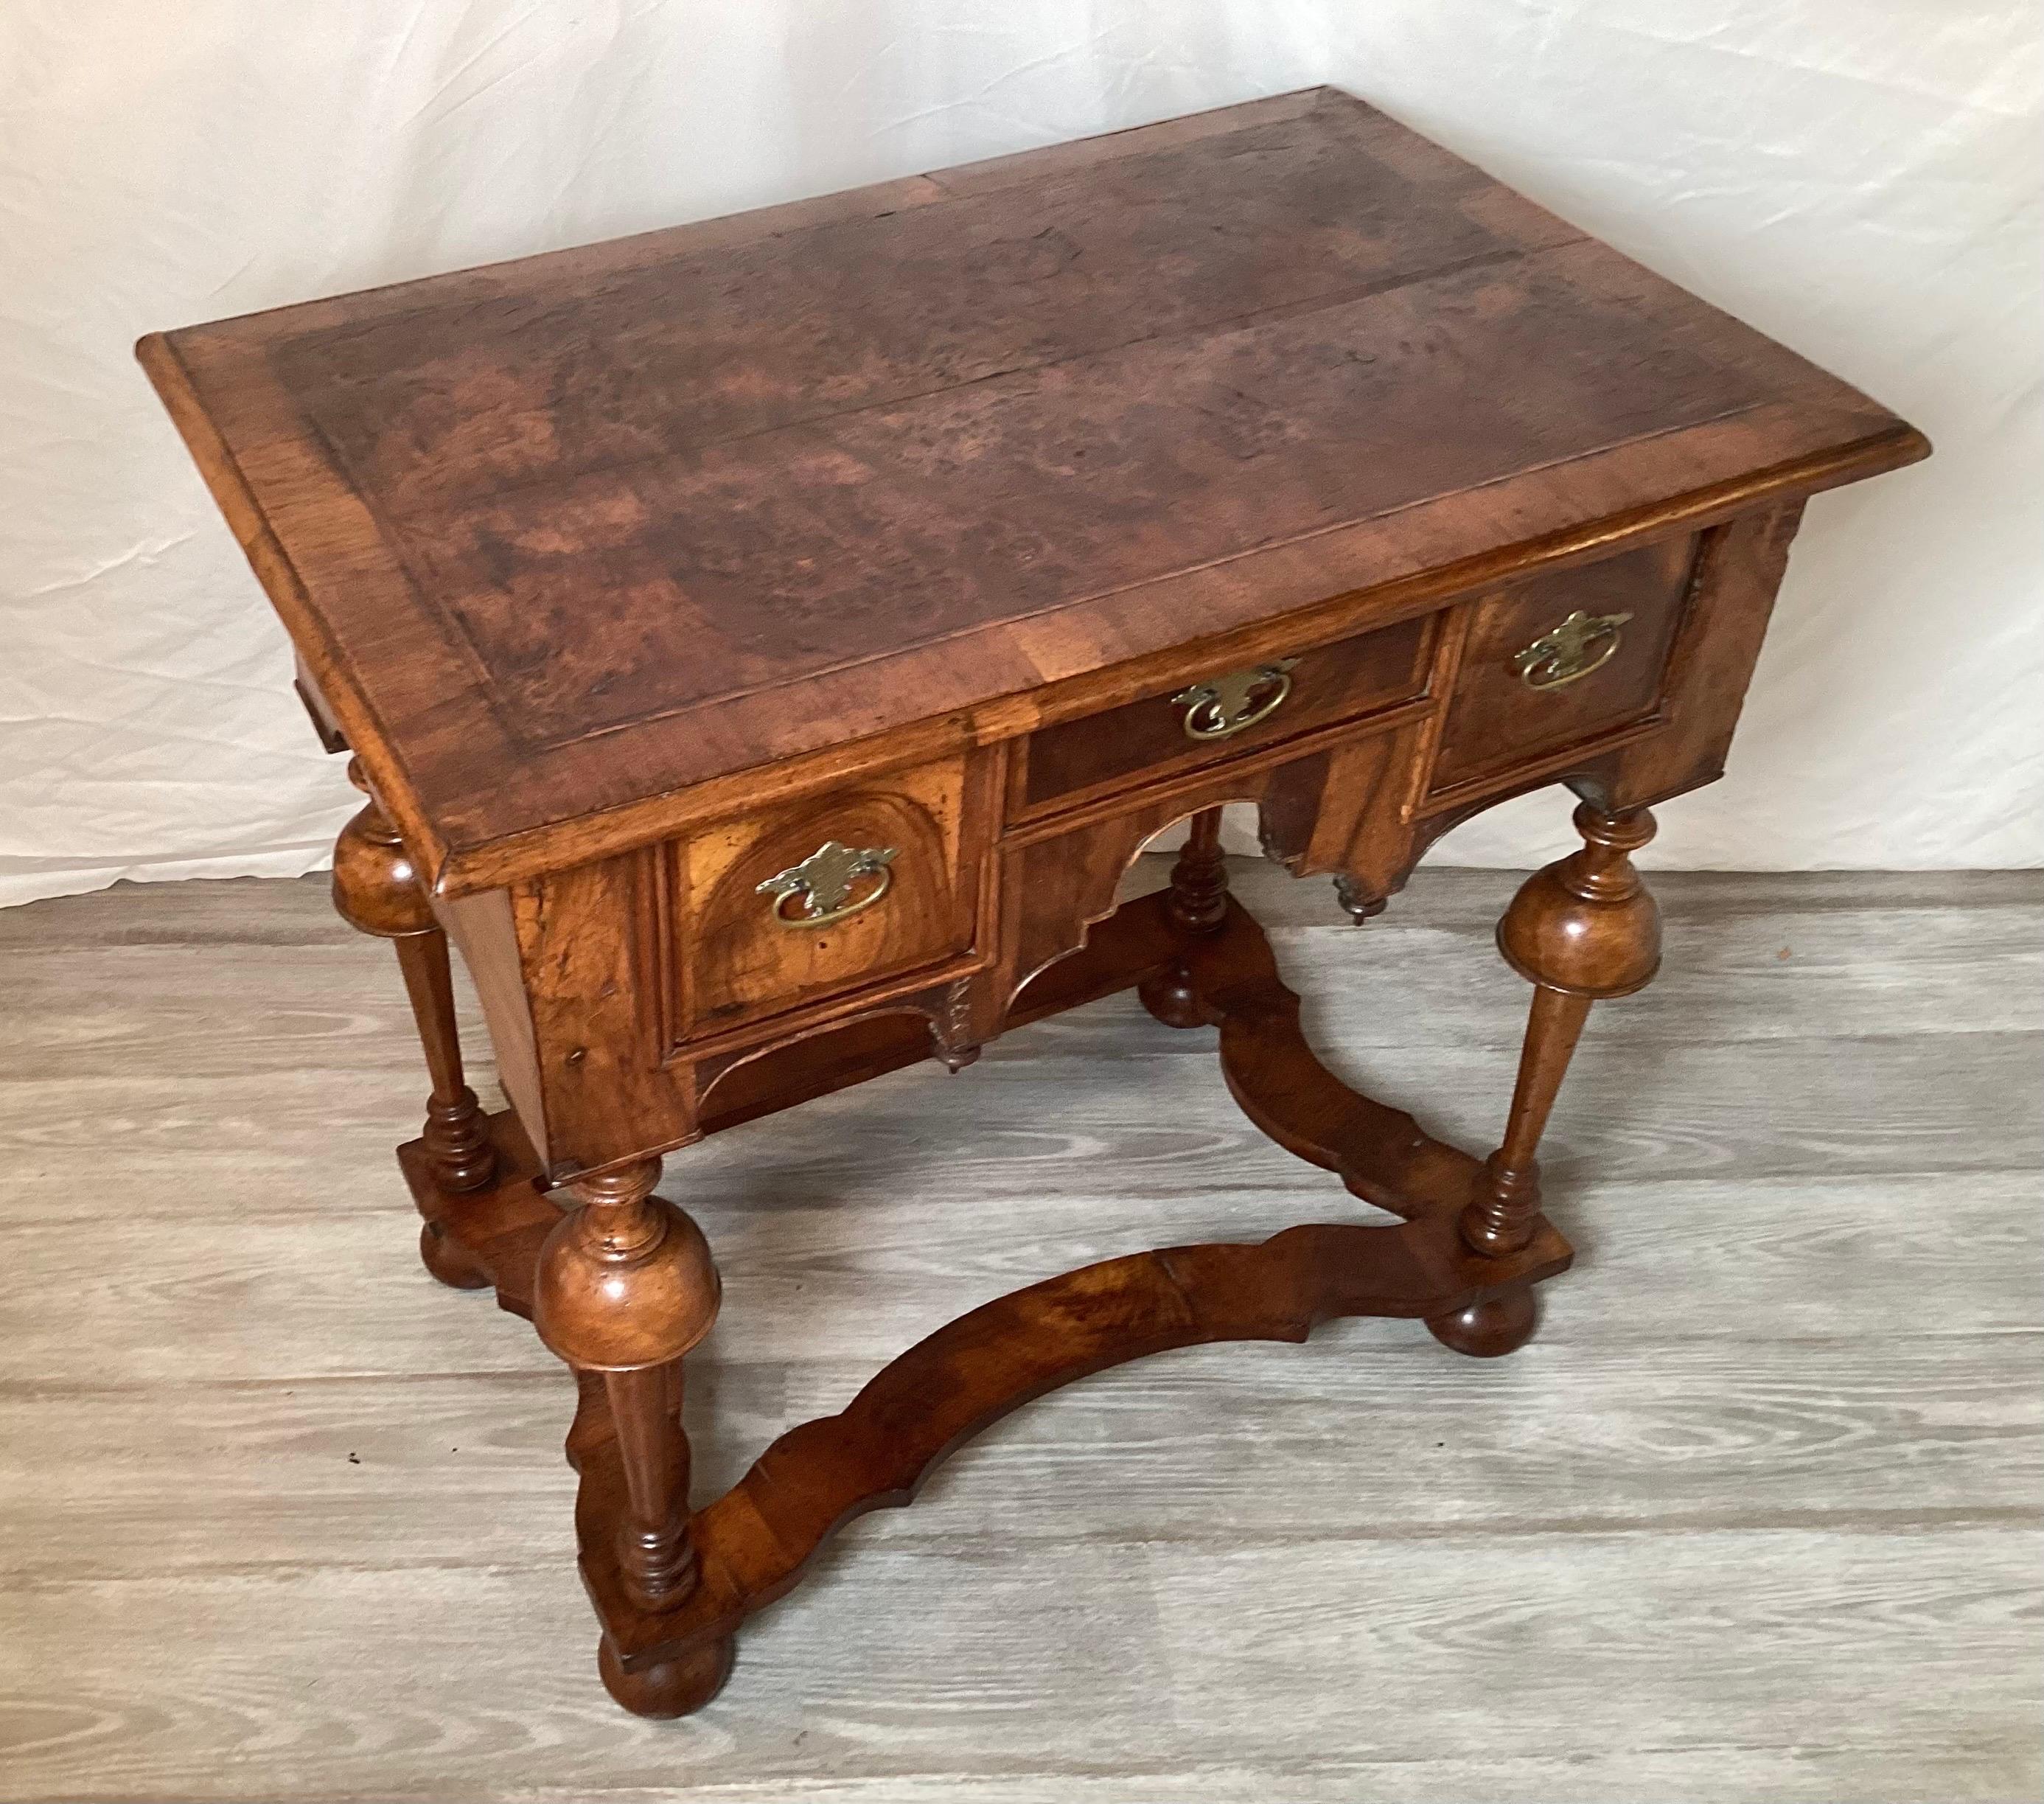 Maple Antique Early 18th Century Burled Walnut William and Mary Lowboy For Sale